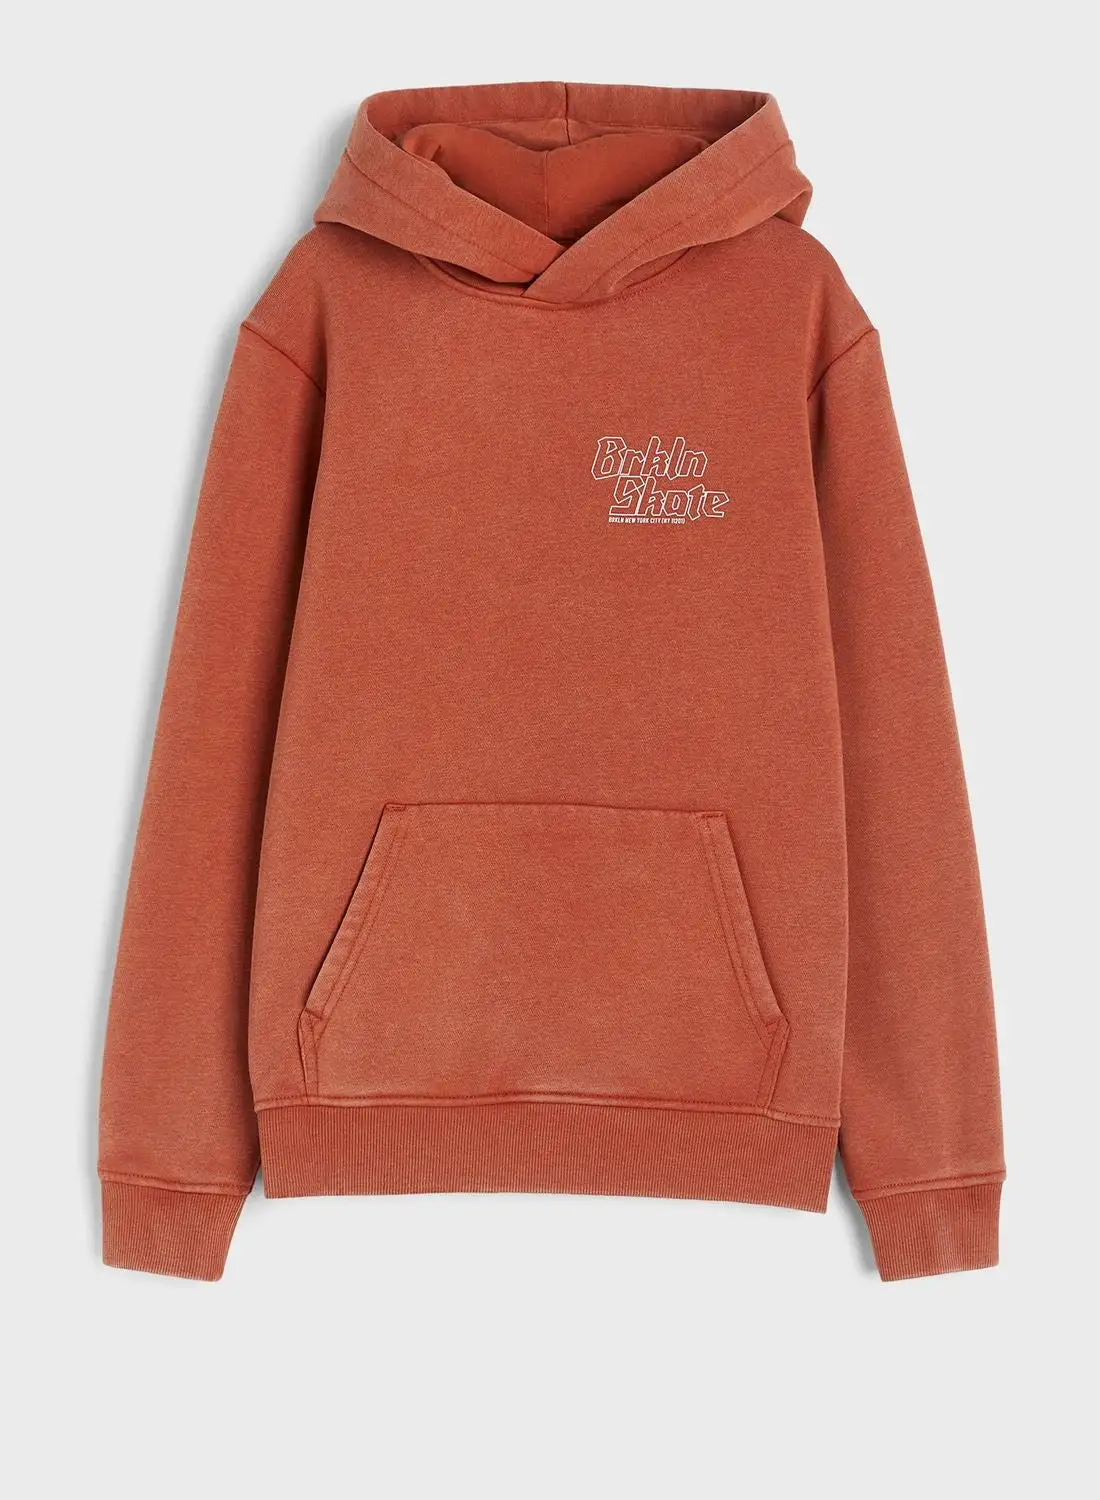 H&M Youth Text Print Hoodie